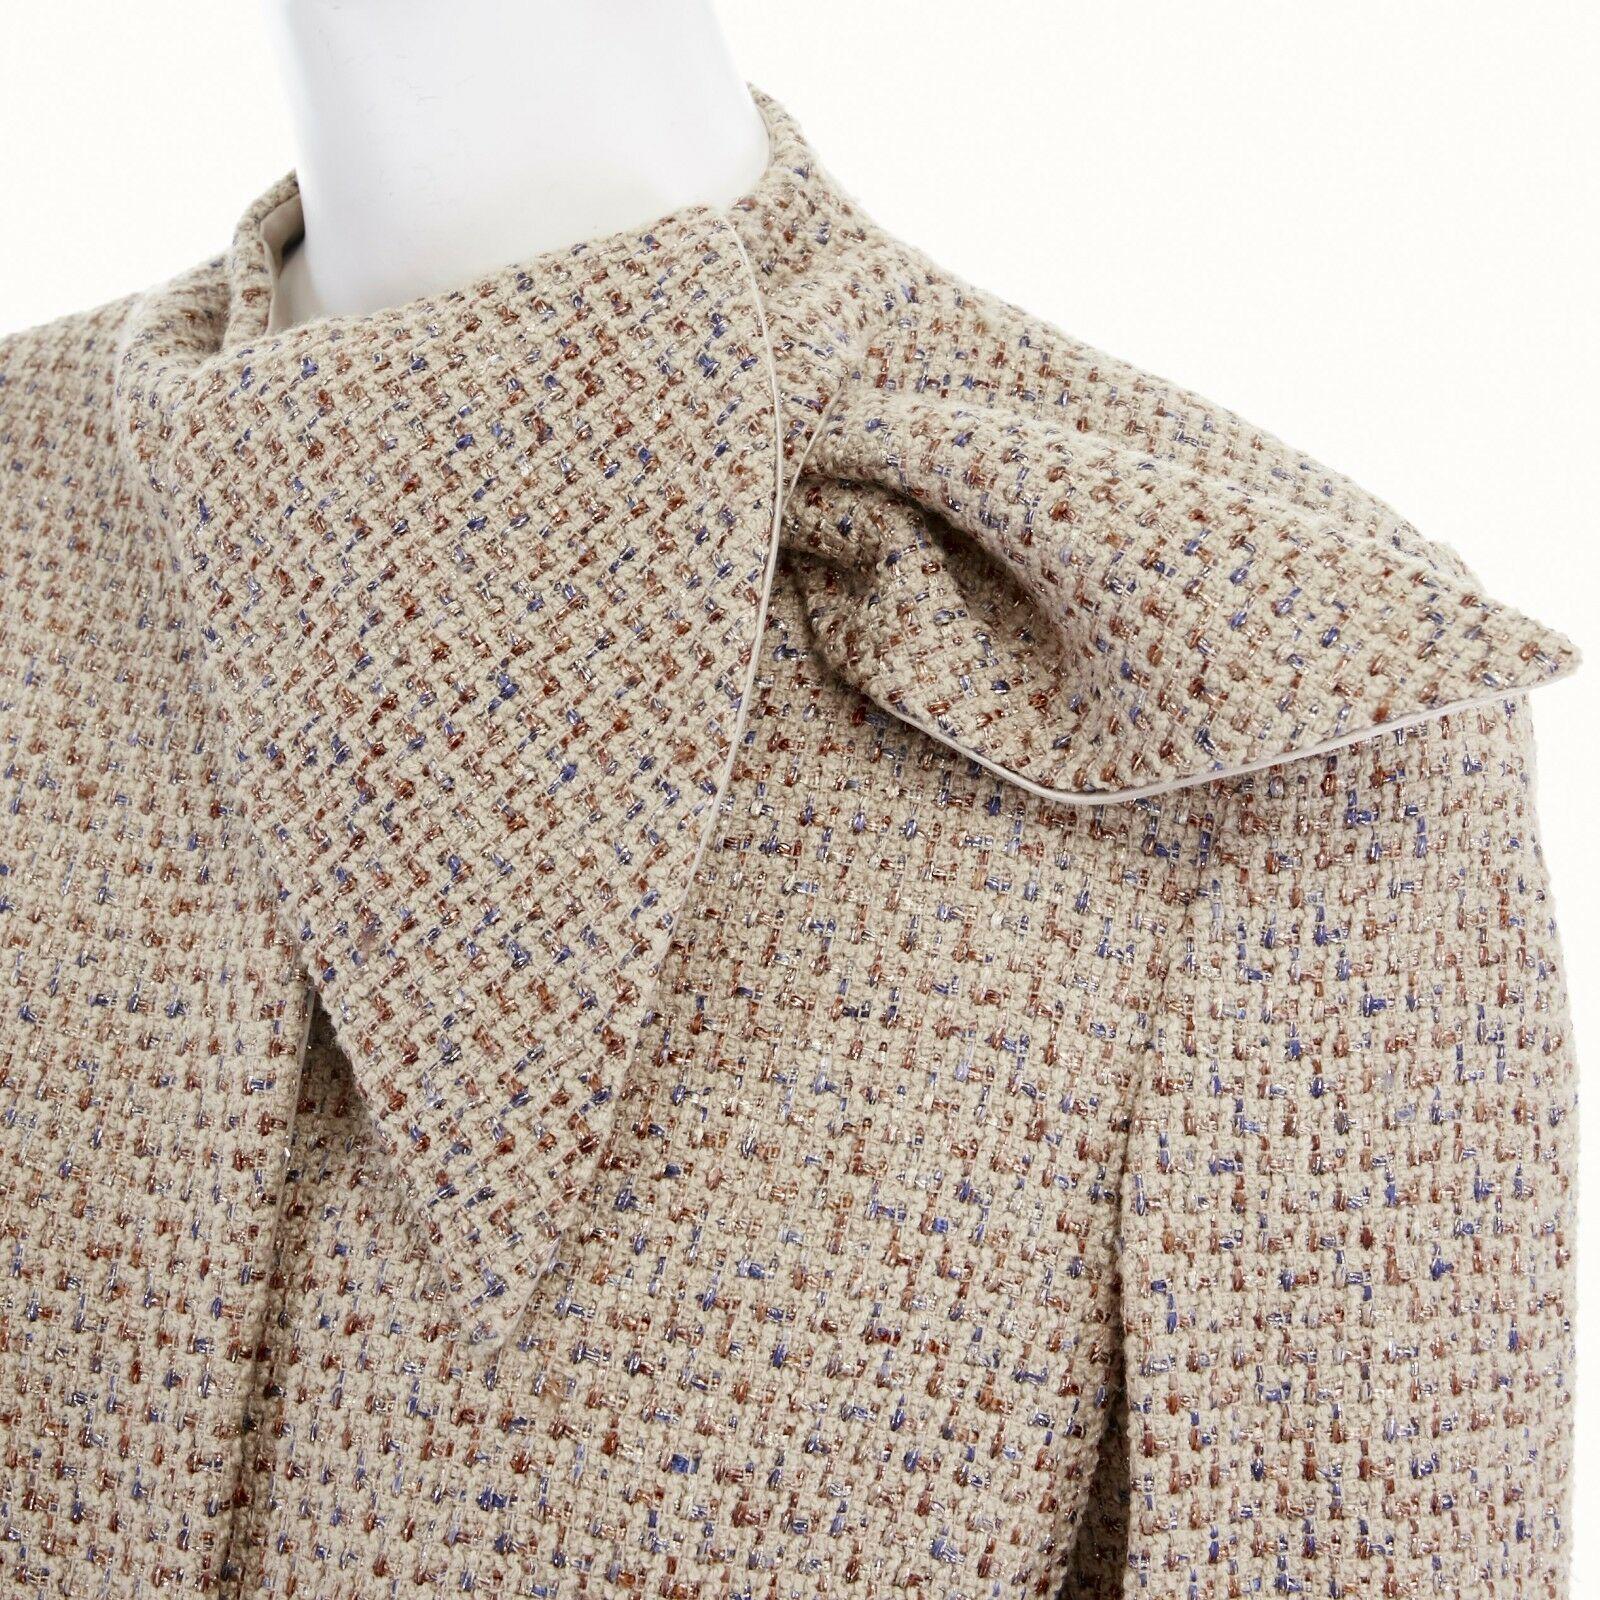 runway ALEXANDER MCQUEEN Vintage AW04 beige boucle tweed tie neck jacket IT42 M
ALEXANDER MCQUEEN
FROM THE FALL WINTER 2004 RUNWAY
Wool, viscose, cotton, silk. 
Light beige with metallic blue and bronze thread boucle tweed outer. 
Mother of pearl